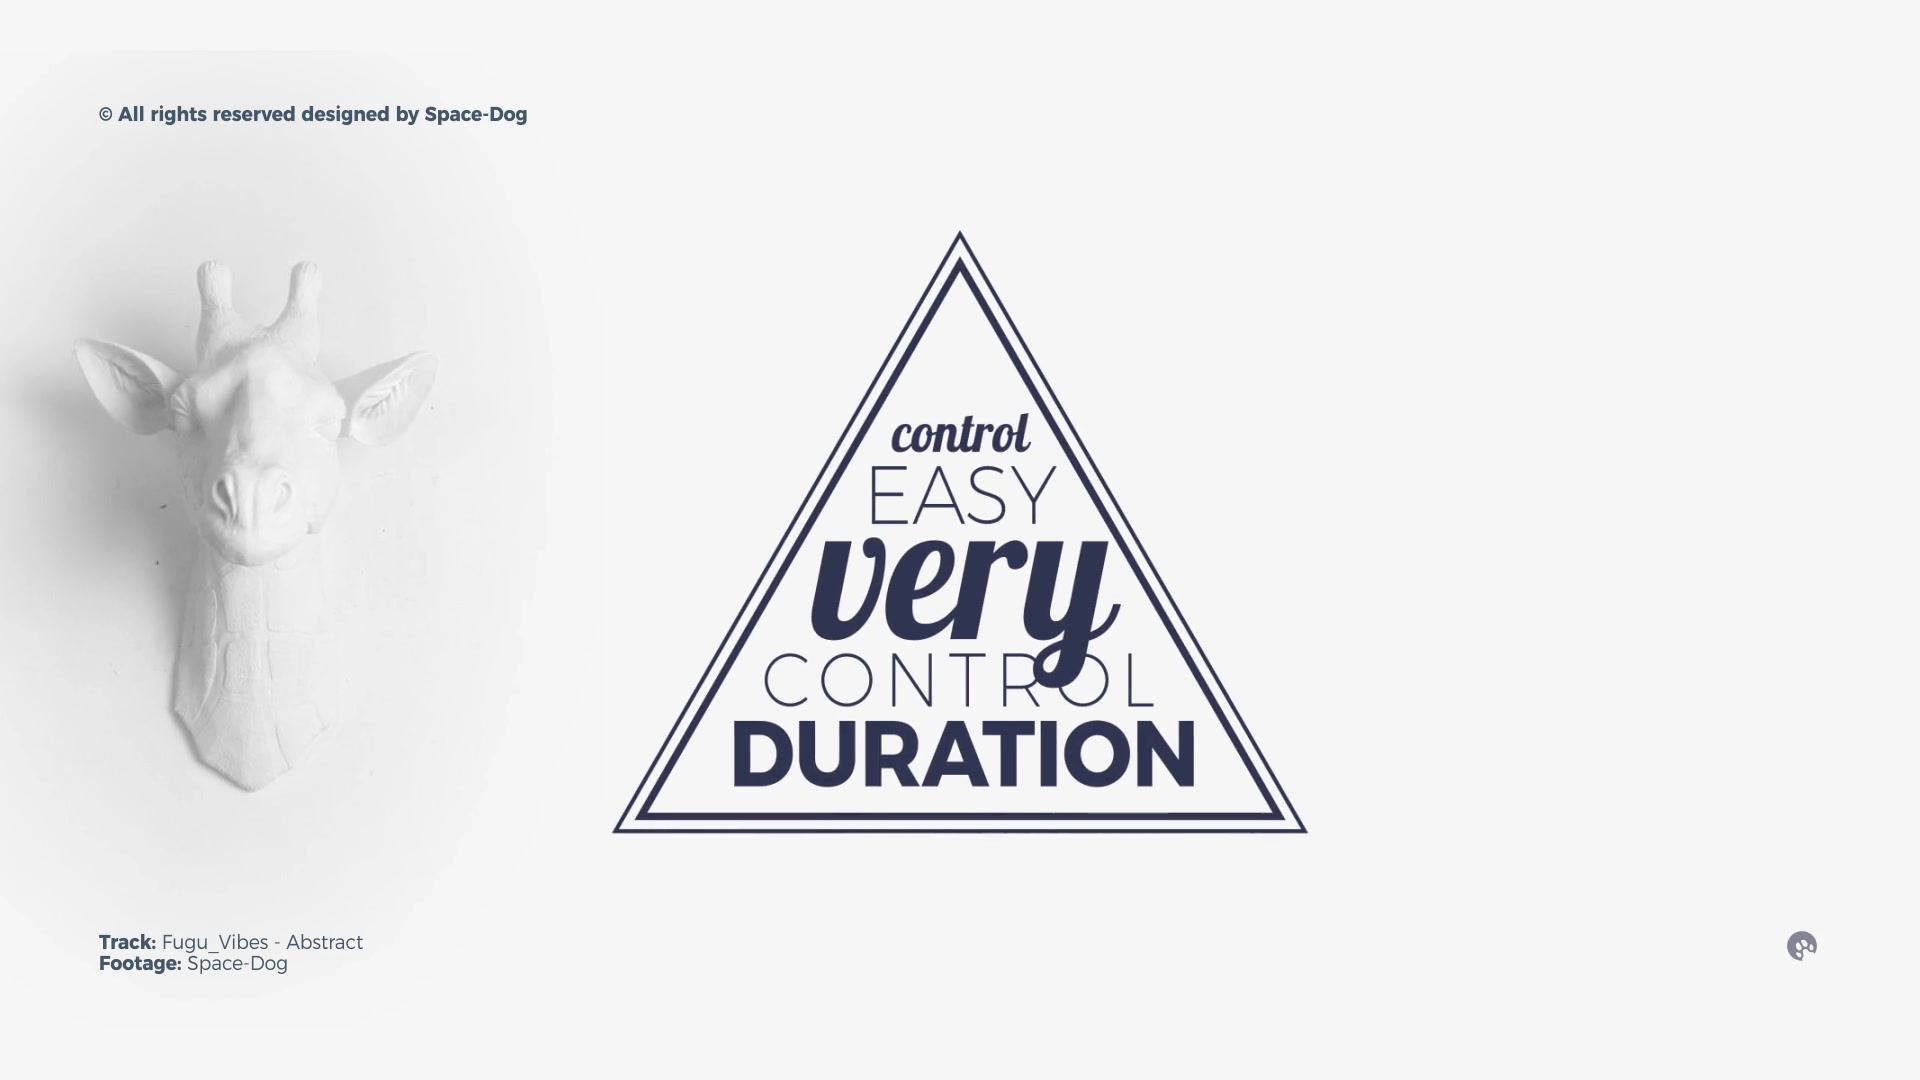 Clean Typography - Download Videohive 20645969